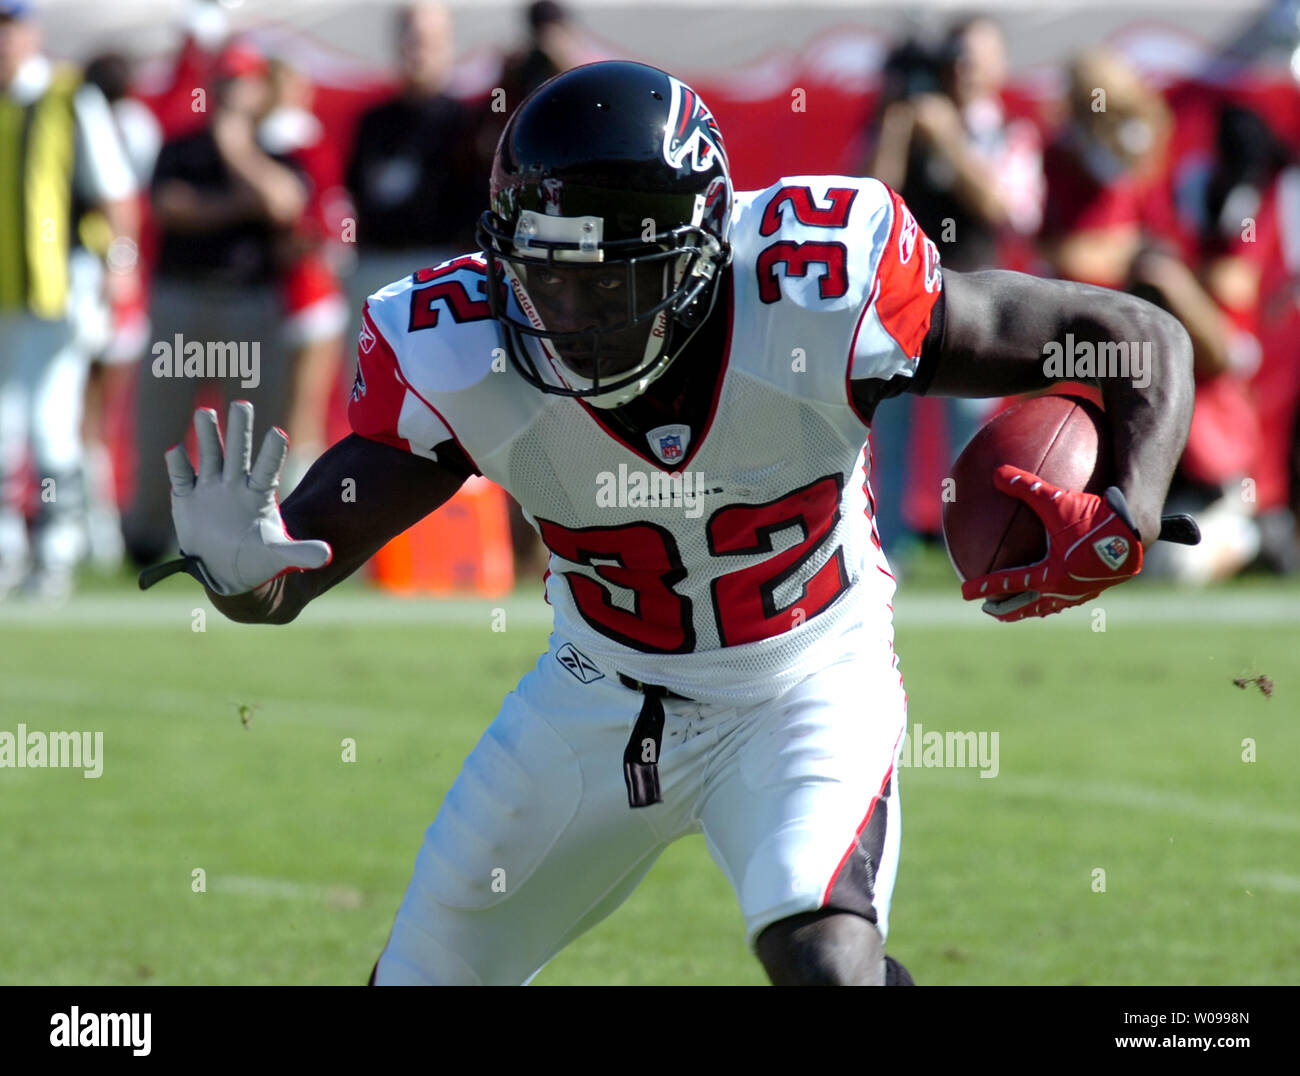 Atlanta Falcons' running back Jerious Norwood (32) advances the ball at Raymond James Stadium in Tampa, Florida on December 16, 2007. The Buccaneers beat the Atlanta Falcons 37-3 clinching a spot in the playoffs and winning the NFC South Championship.     (UPI Photo/Cathy Kapulka) Stock Photo